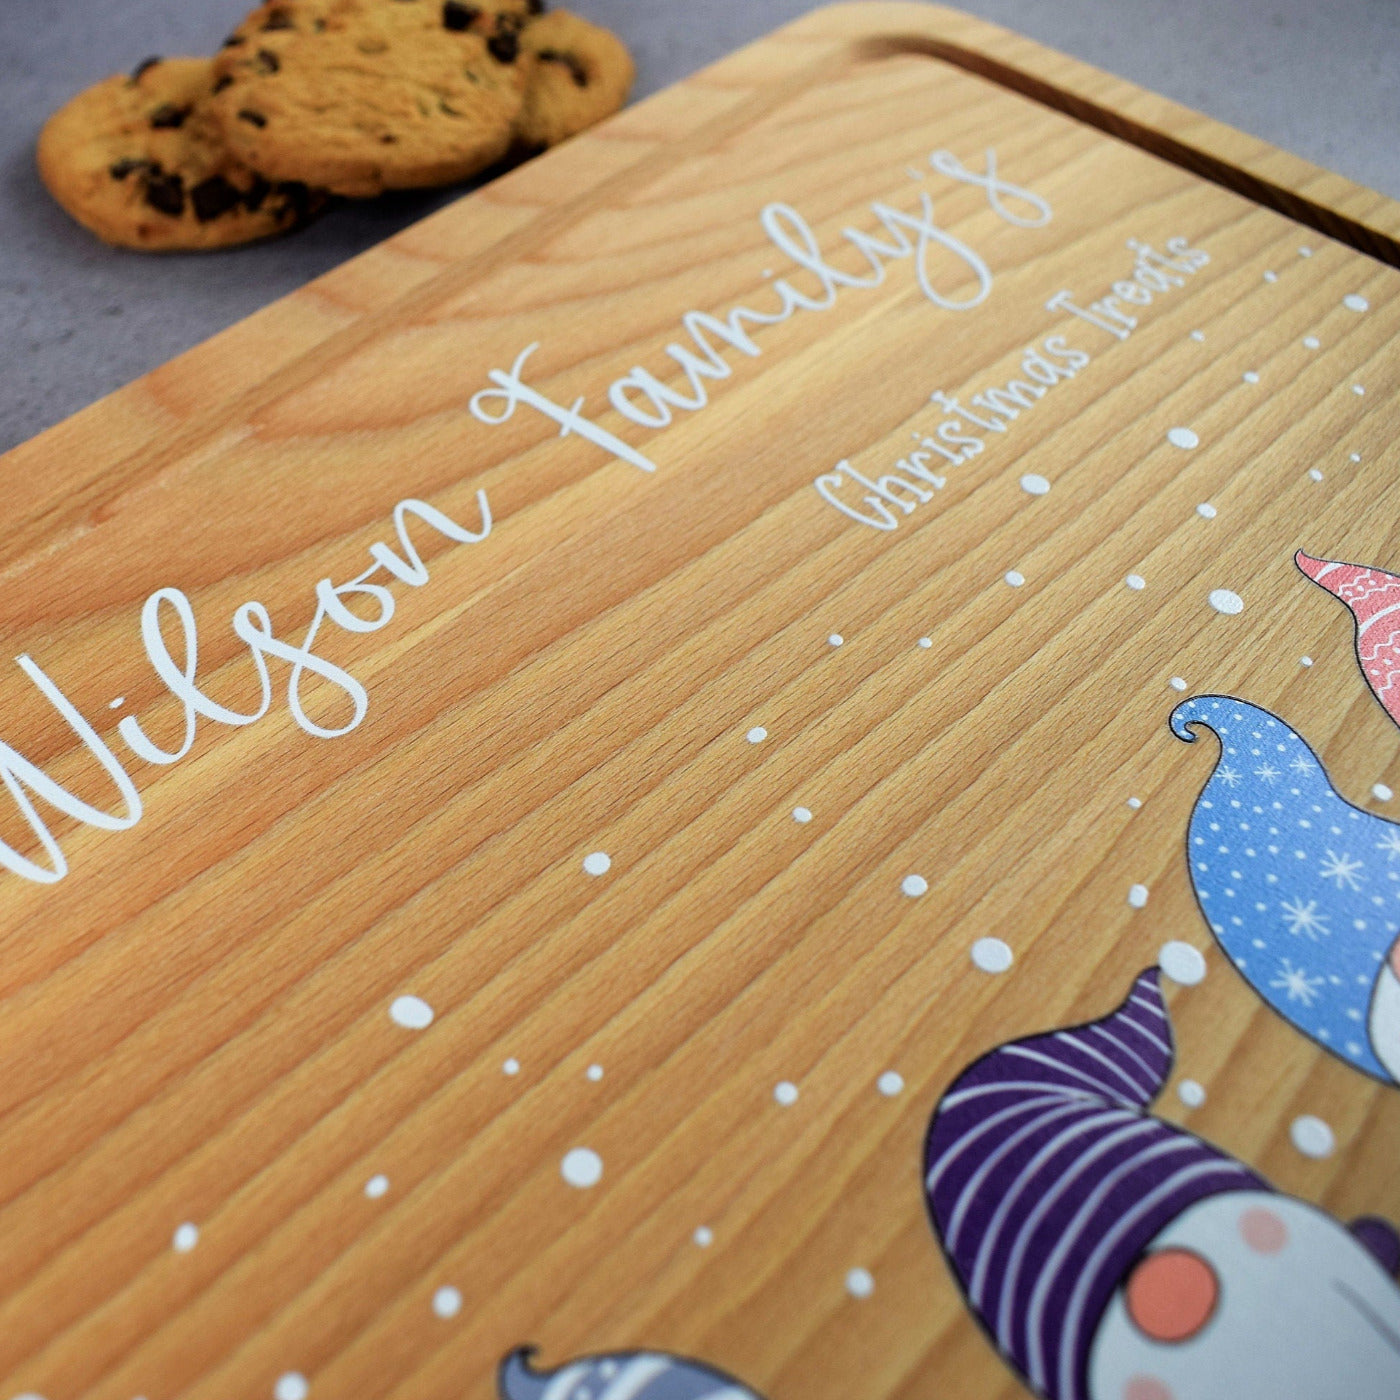 Personalised Christmas Gonk Cheese Board & Serving Platter